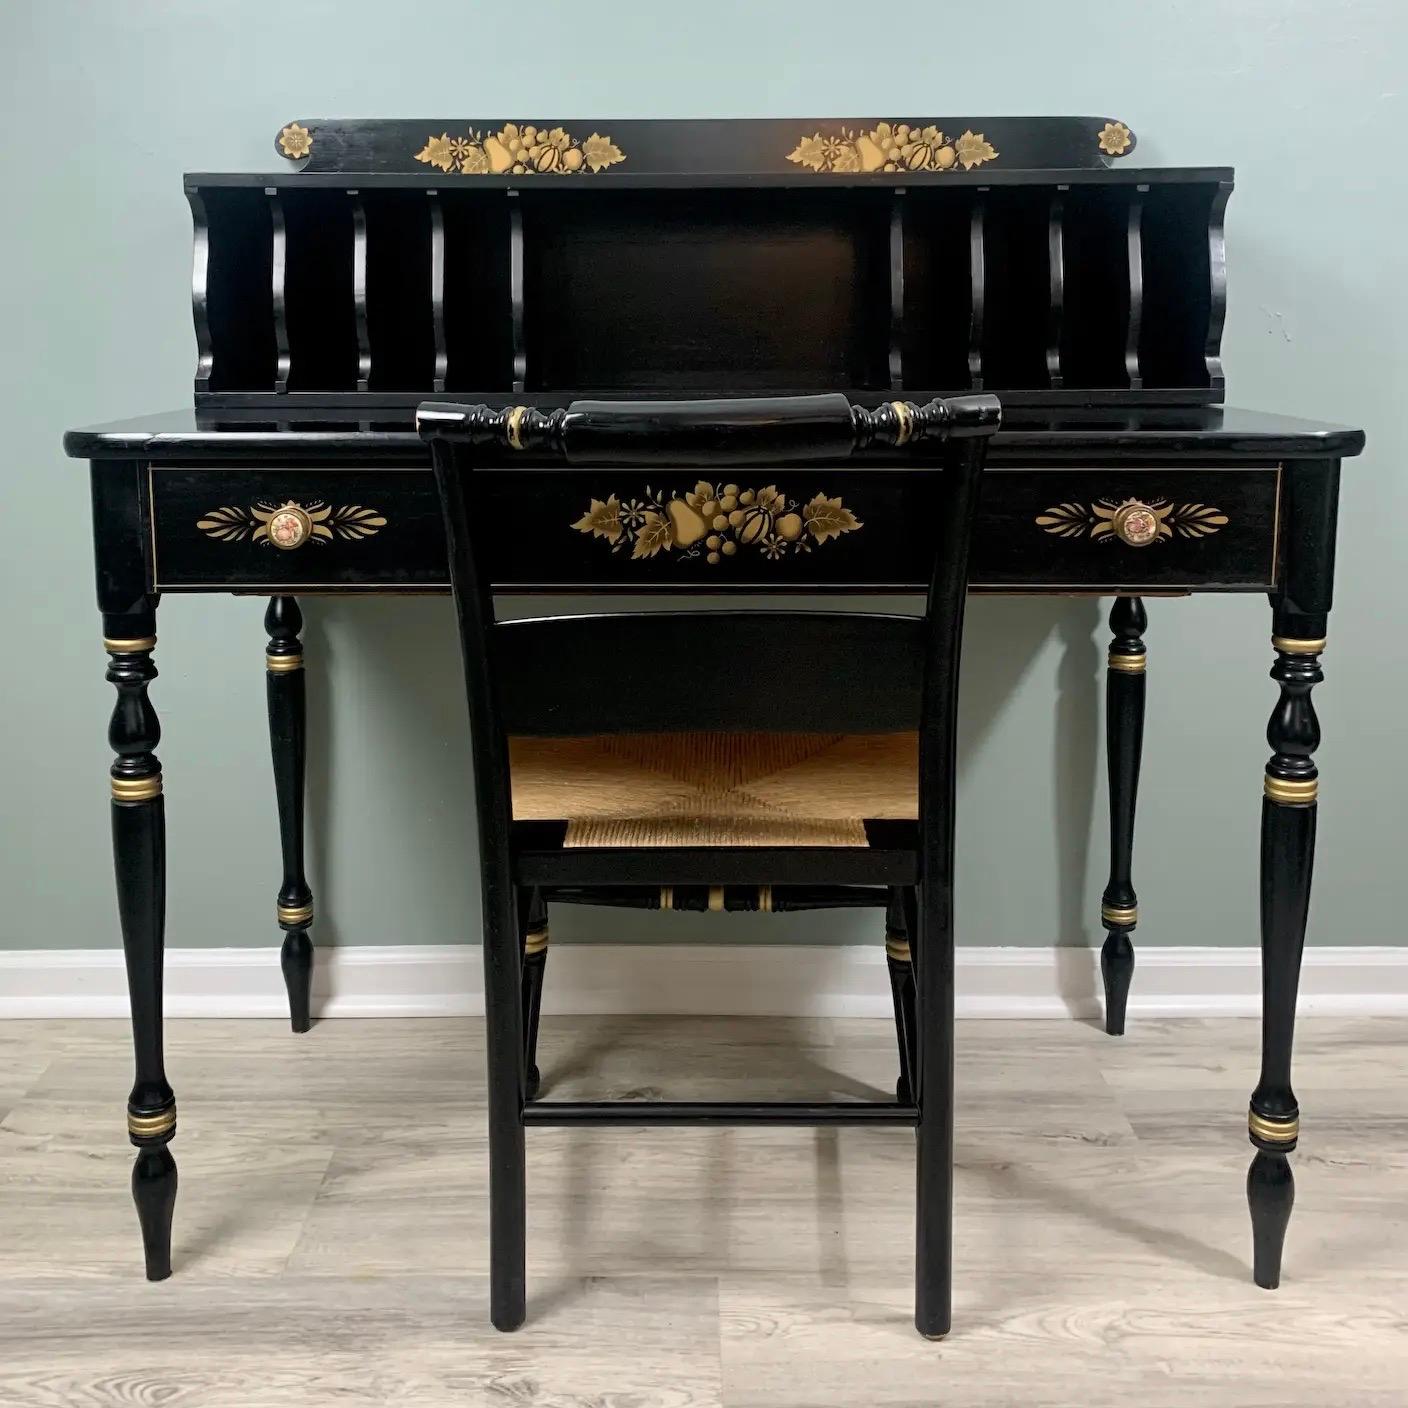 A stunning vintage two-piece set, wonderfully preserved, to add a touch of historical charm to your home décor. Painted in rich black with gold accents featuring the classic Harvest stenciling, beautiful brass/porcelain drawer pulls displaying a